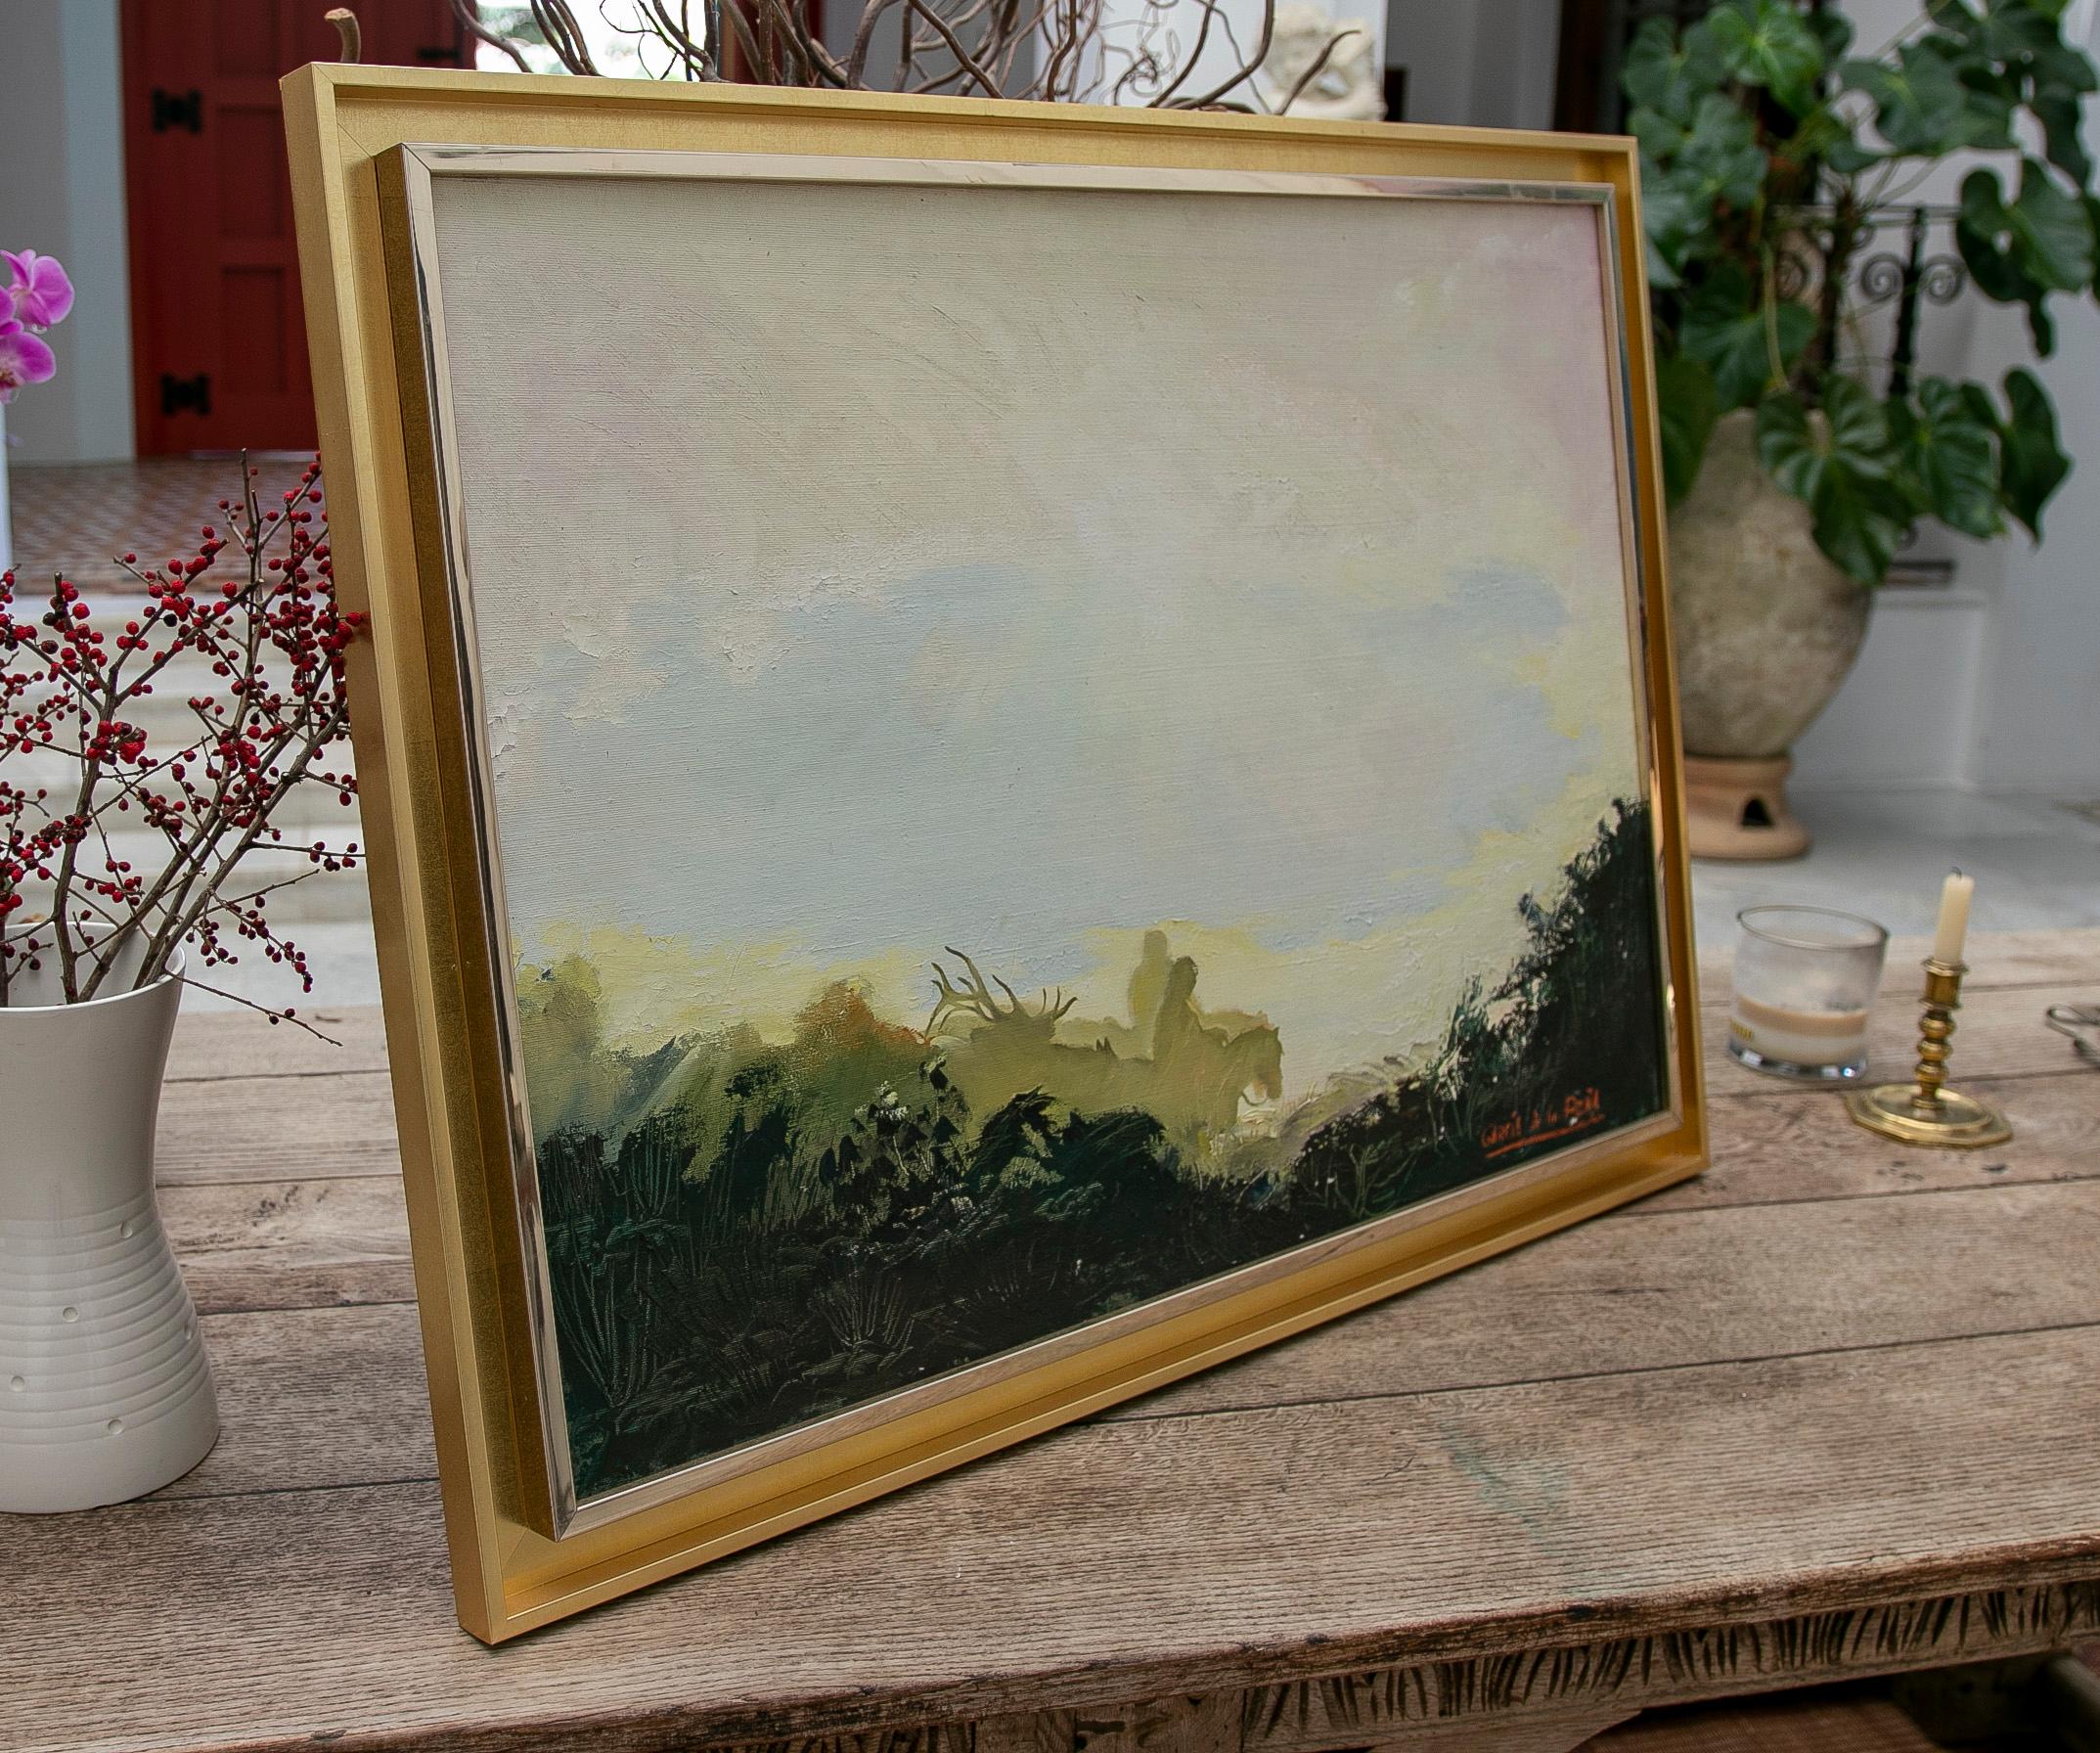 Oil Painting on Canvas by Garcia de la Peña with Landscape and Horse
Measurements with frame: 76x101x3,5cm.